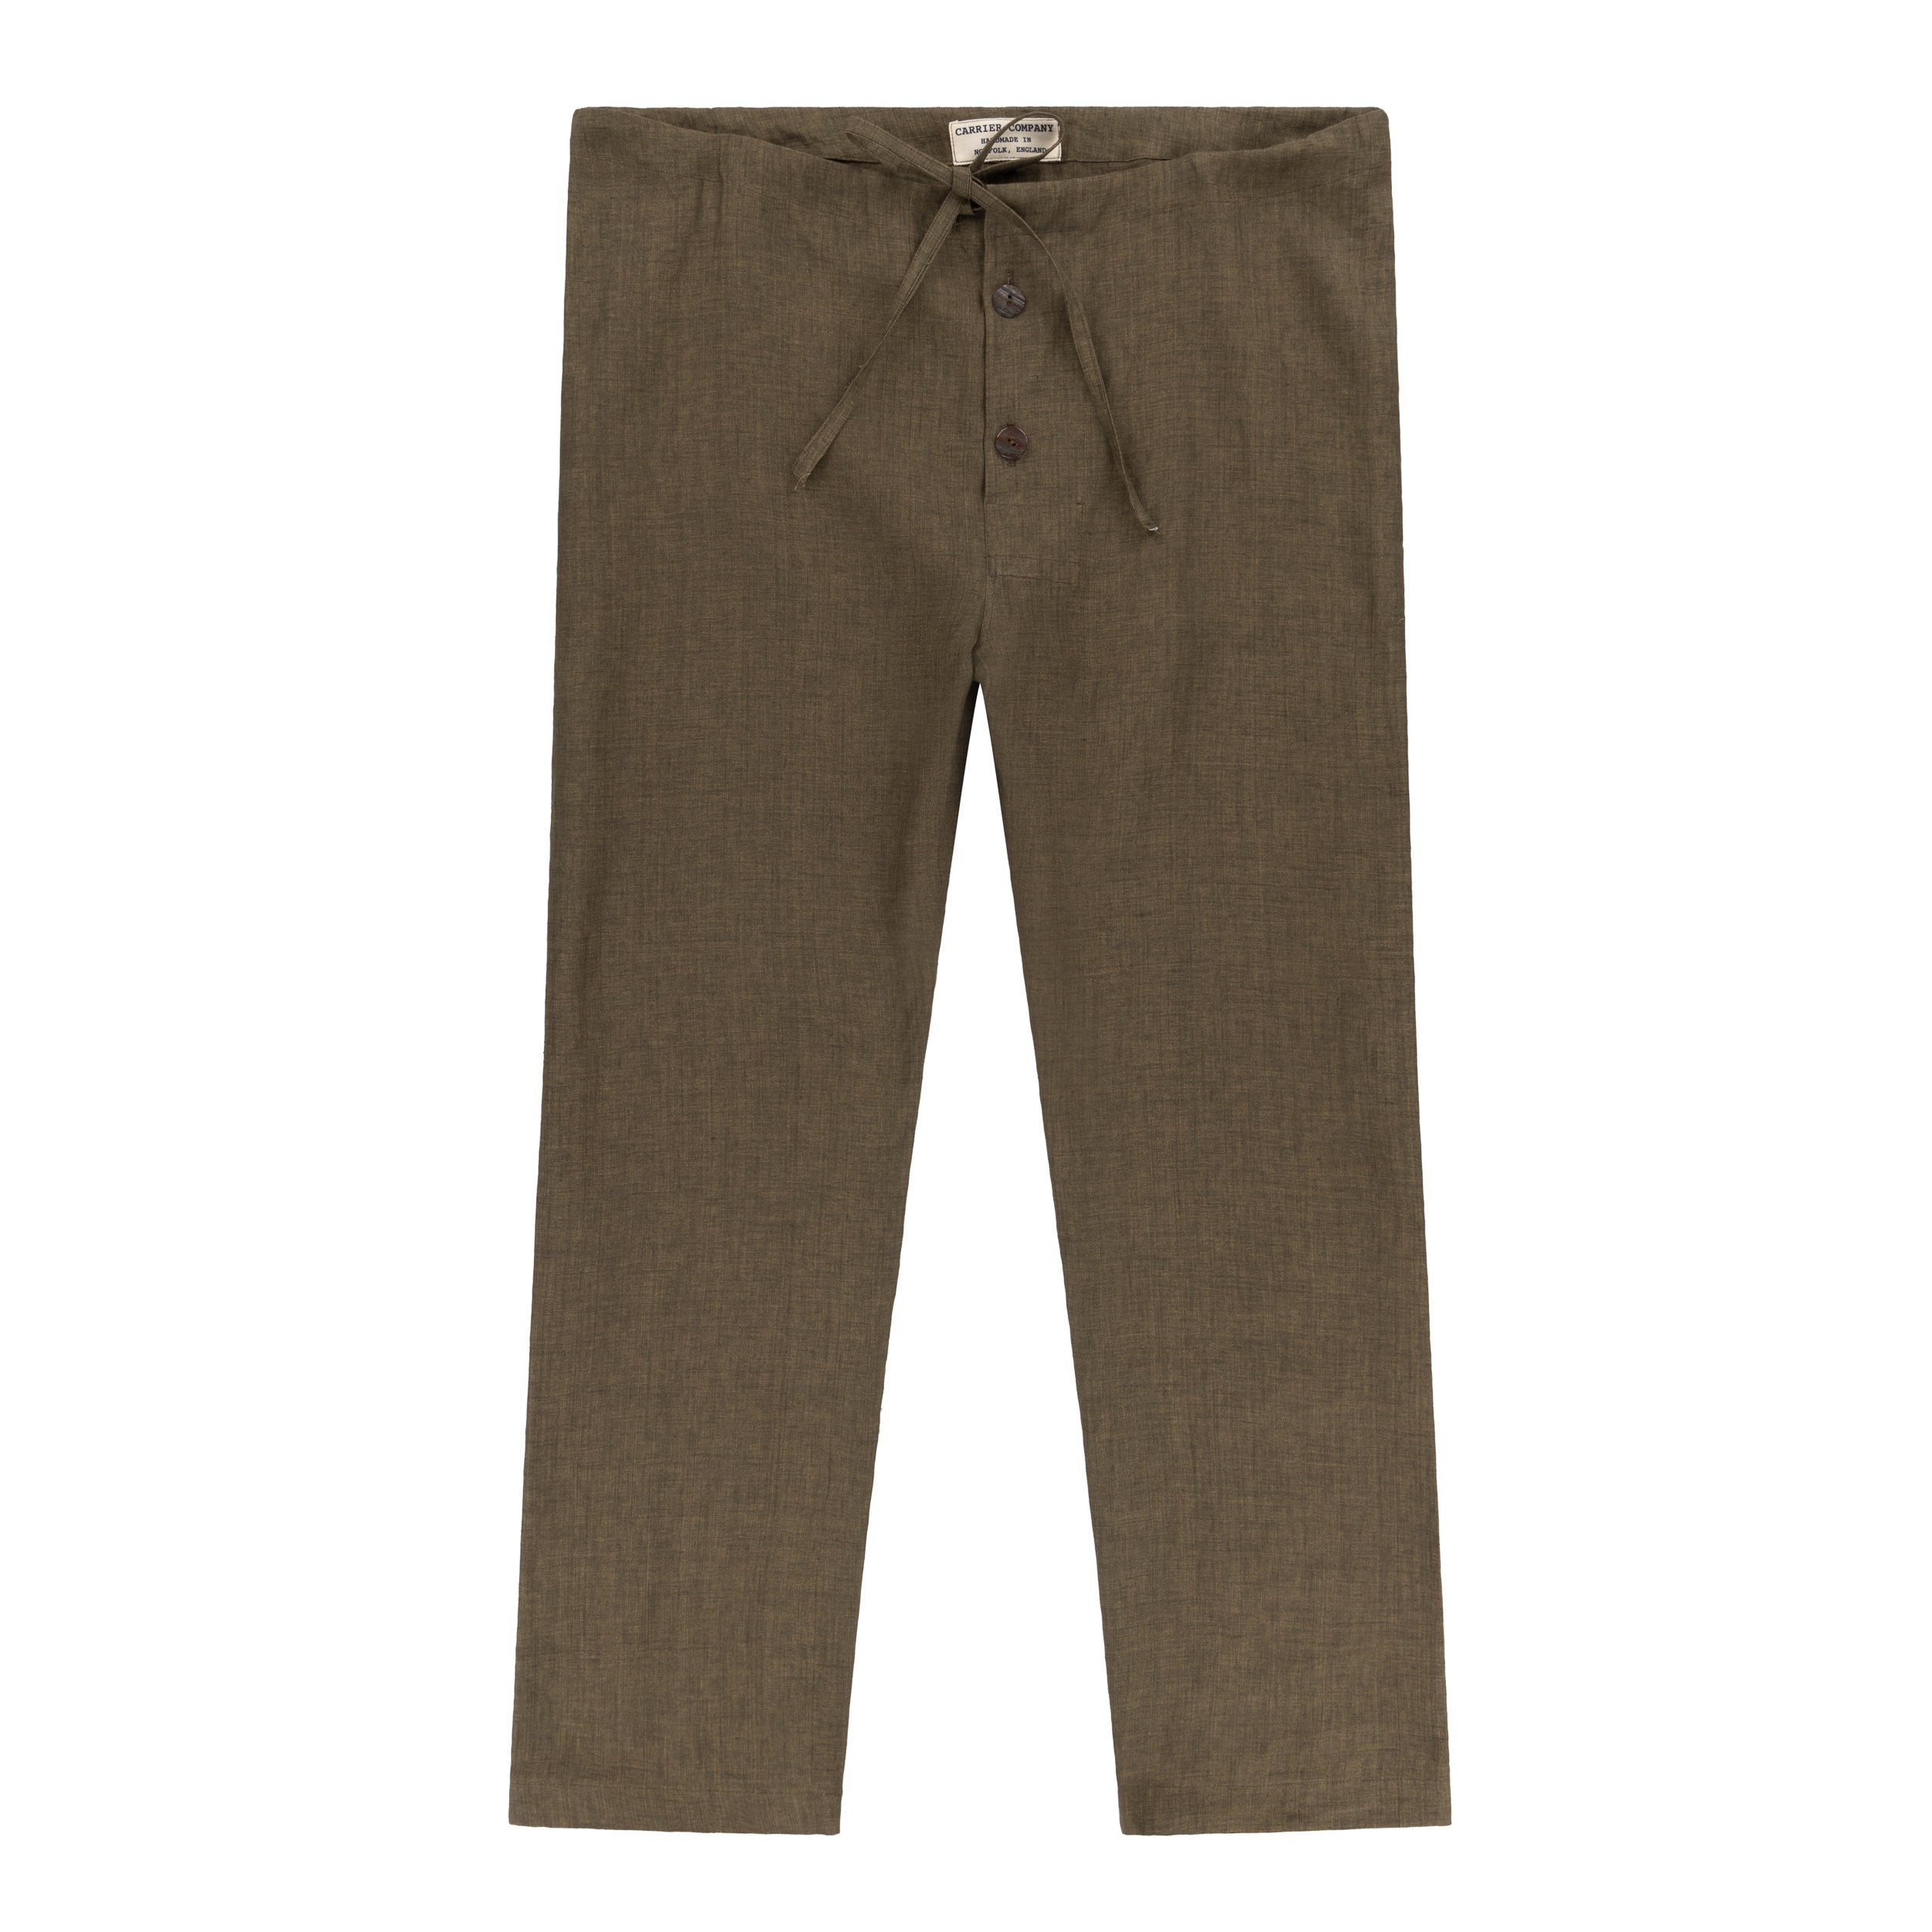 Carrier Company Moss Linen Pyjama bottoms with drawstring and buttons